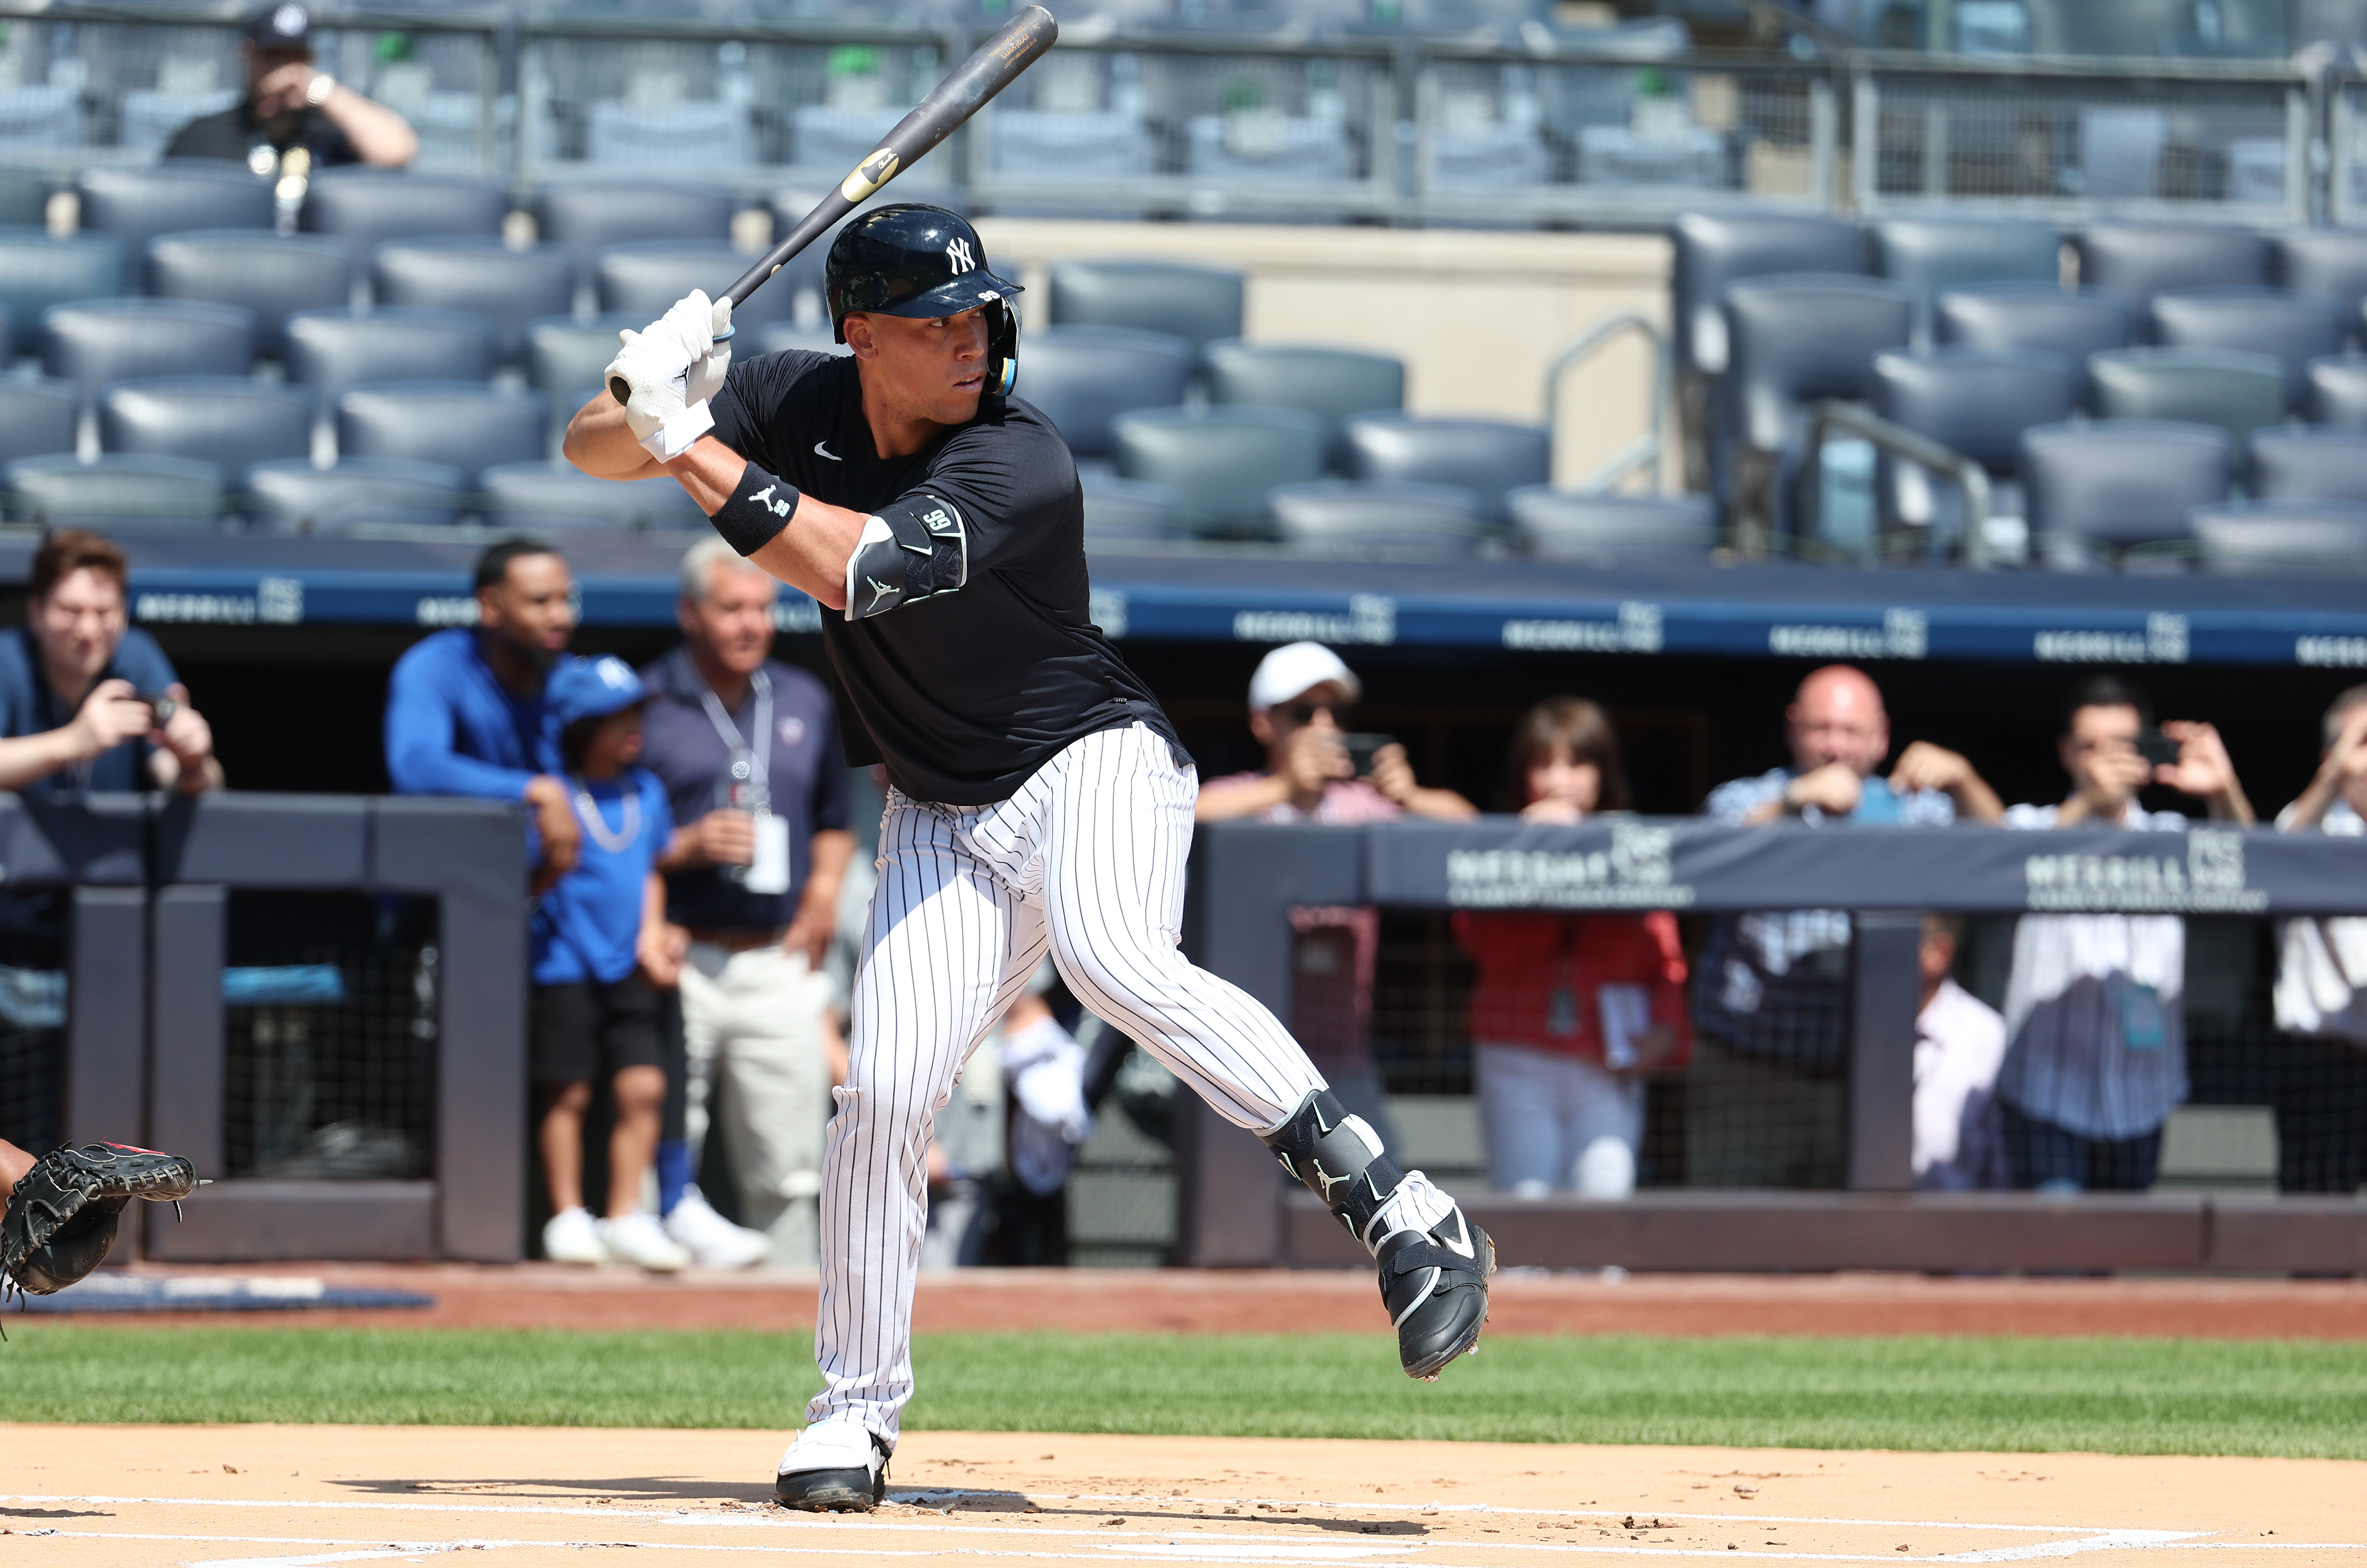 Ken Rosenthal provides updates on Aaron Judge's timeline to return with  Yankees